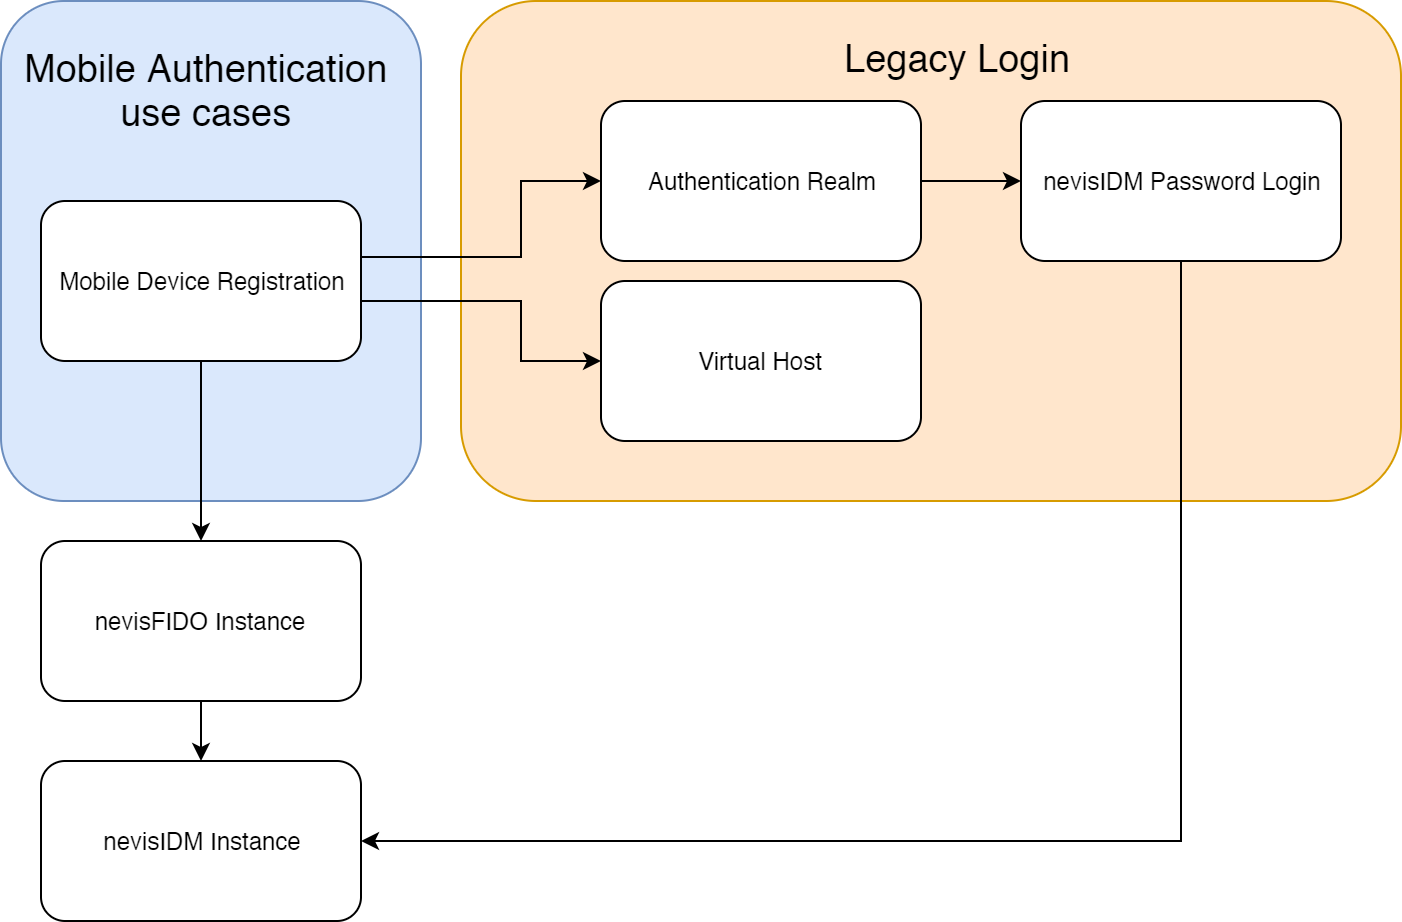 The Mobile Device Registration pattern and its connections